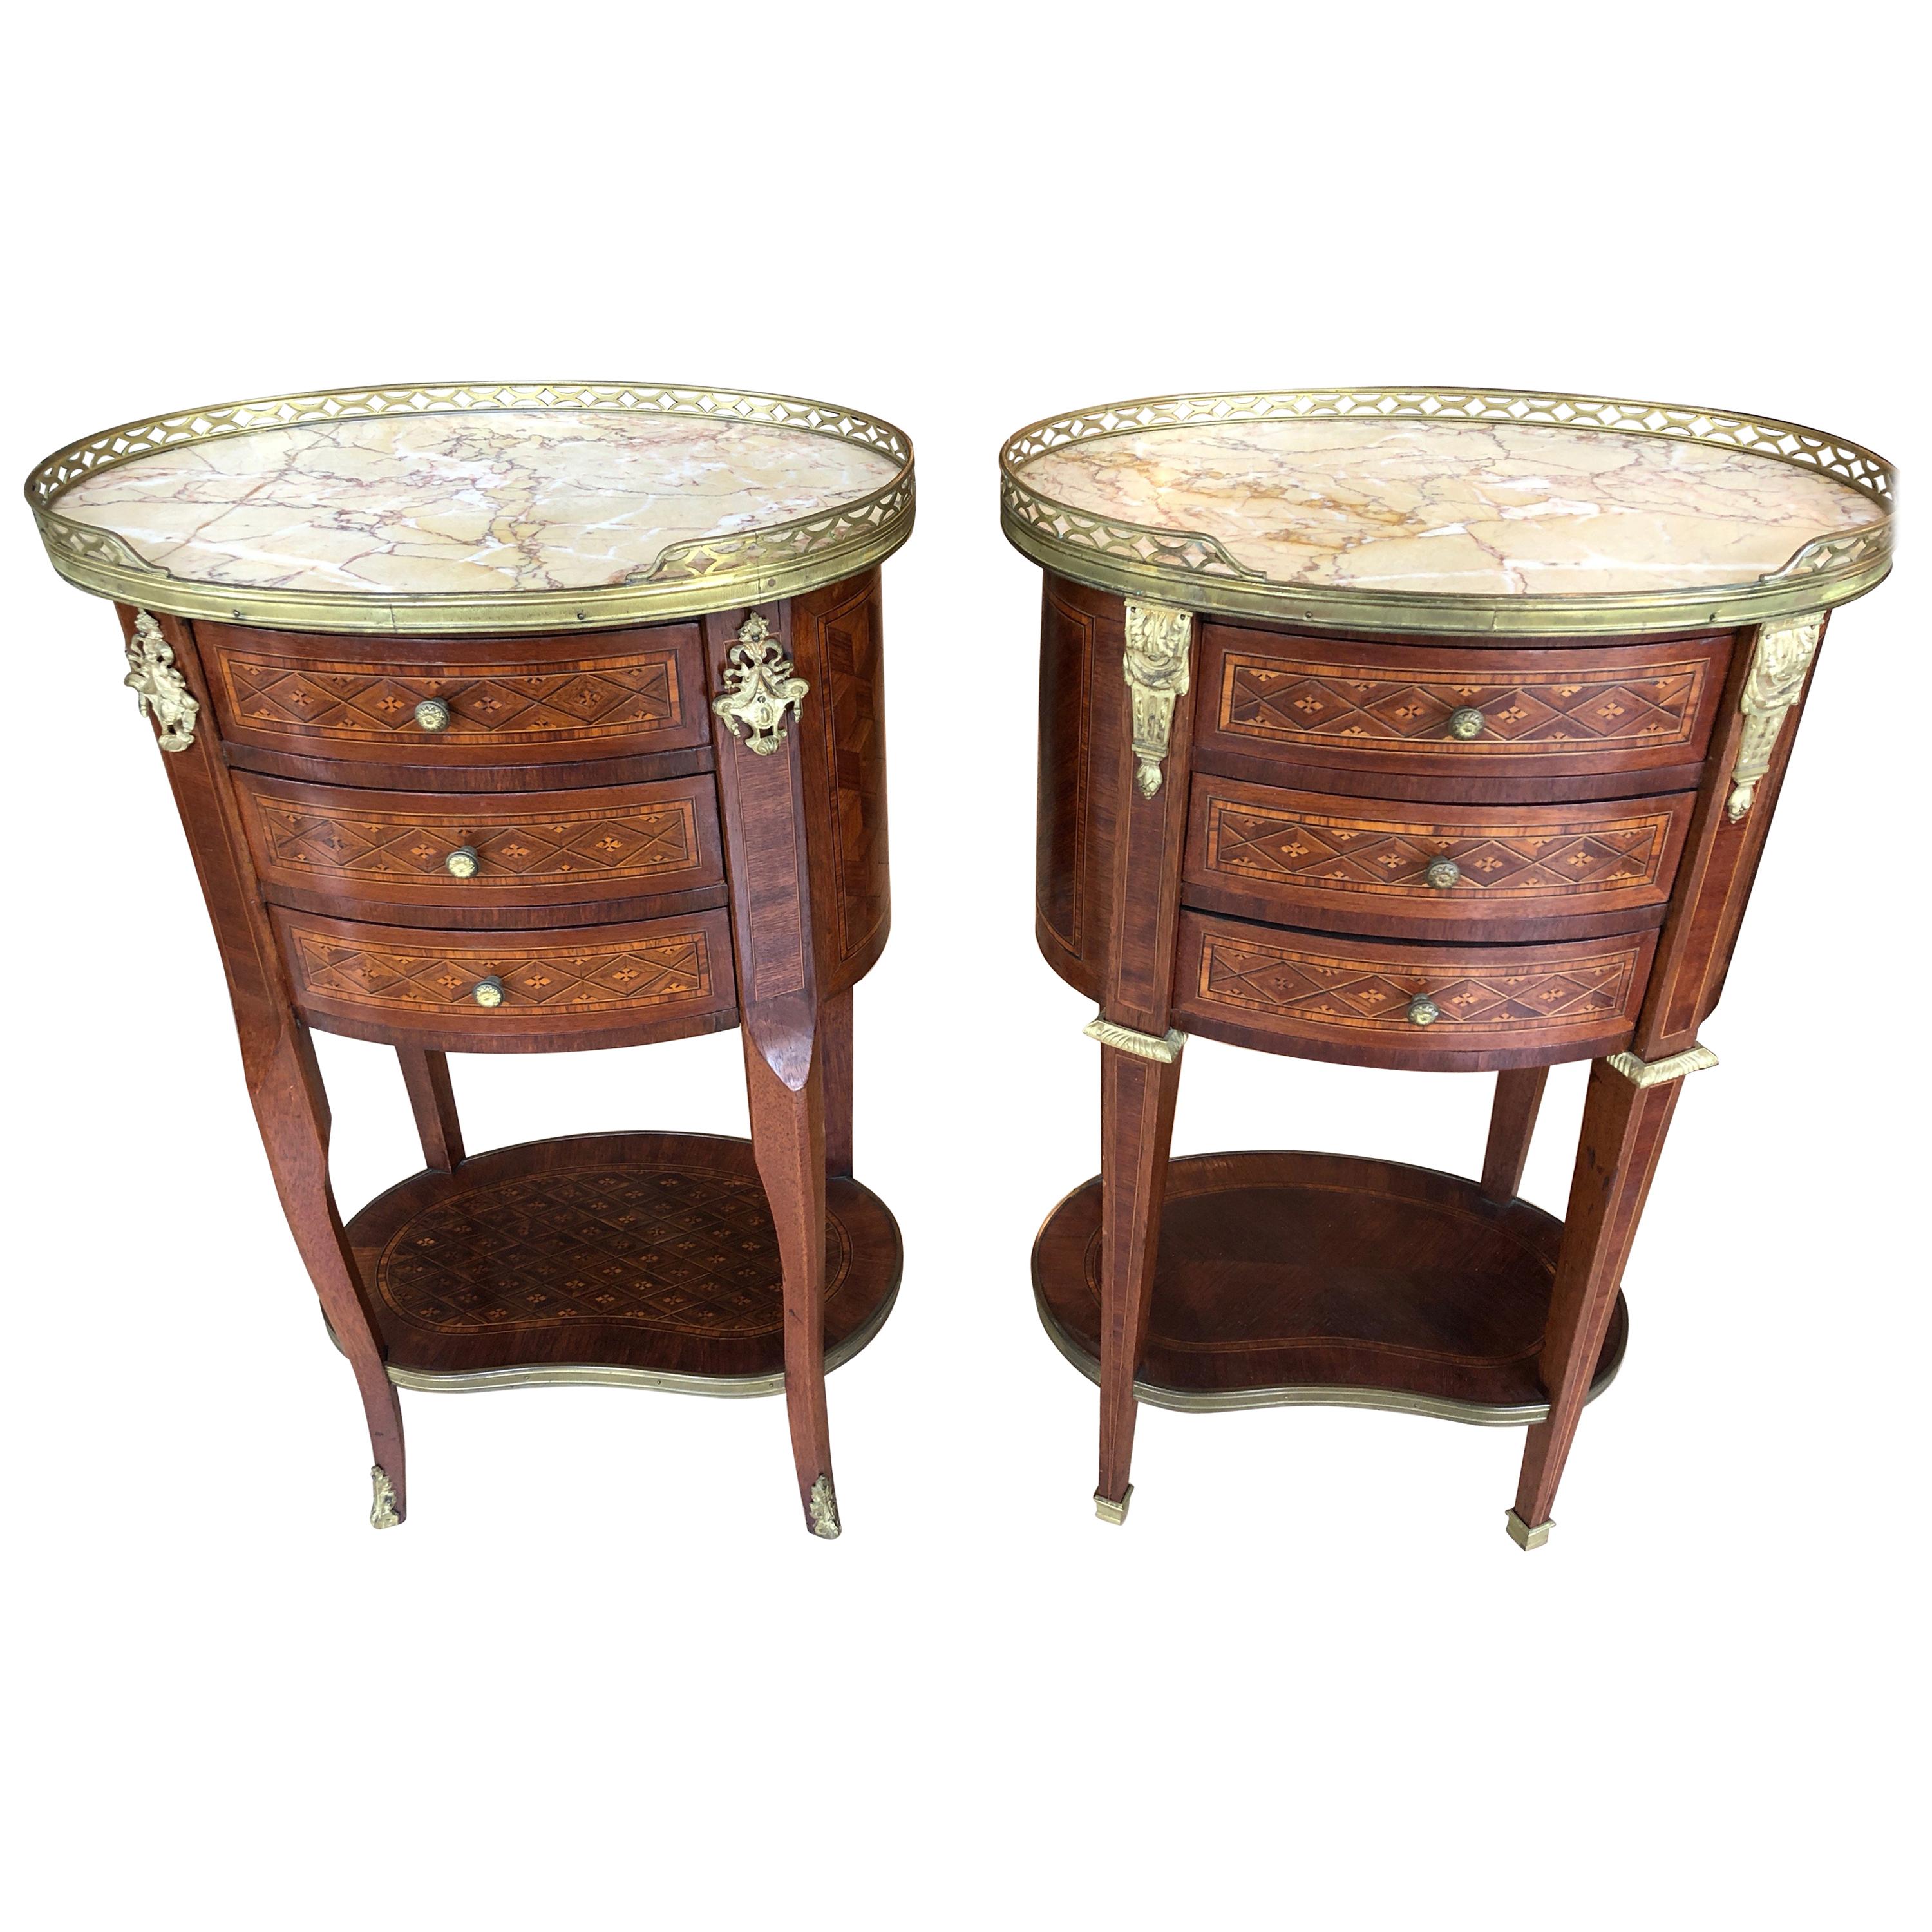 Wonderful Pair of Oval Inlay Mahogany and Marble Nightstands